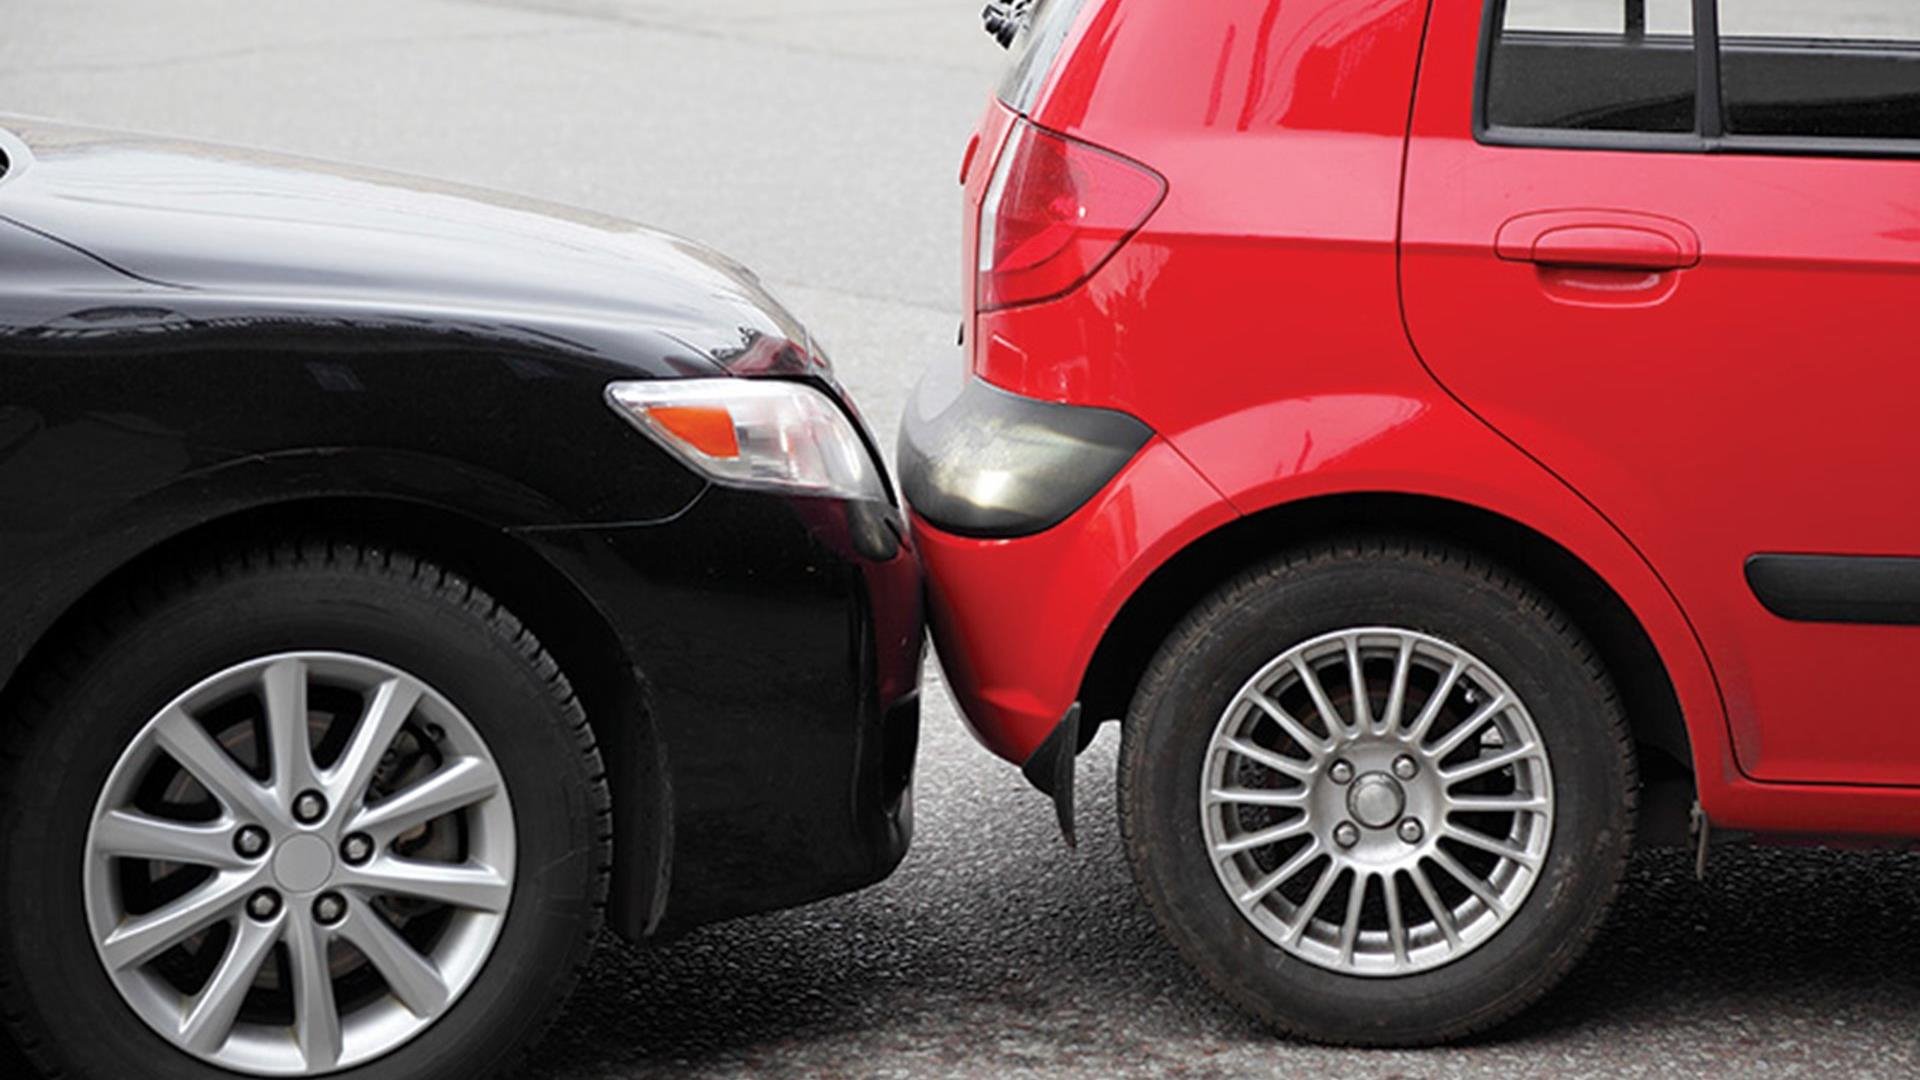 UK Insurance Ltd v Holden & Another - The meaning of "use" in a motor insurance policy